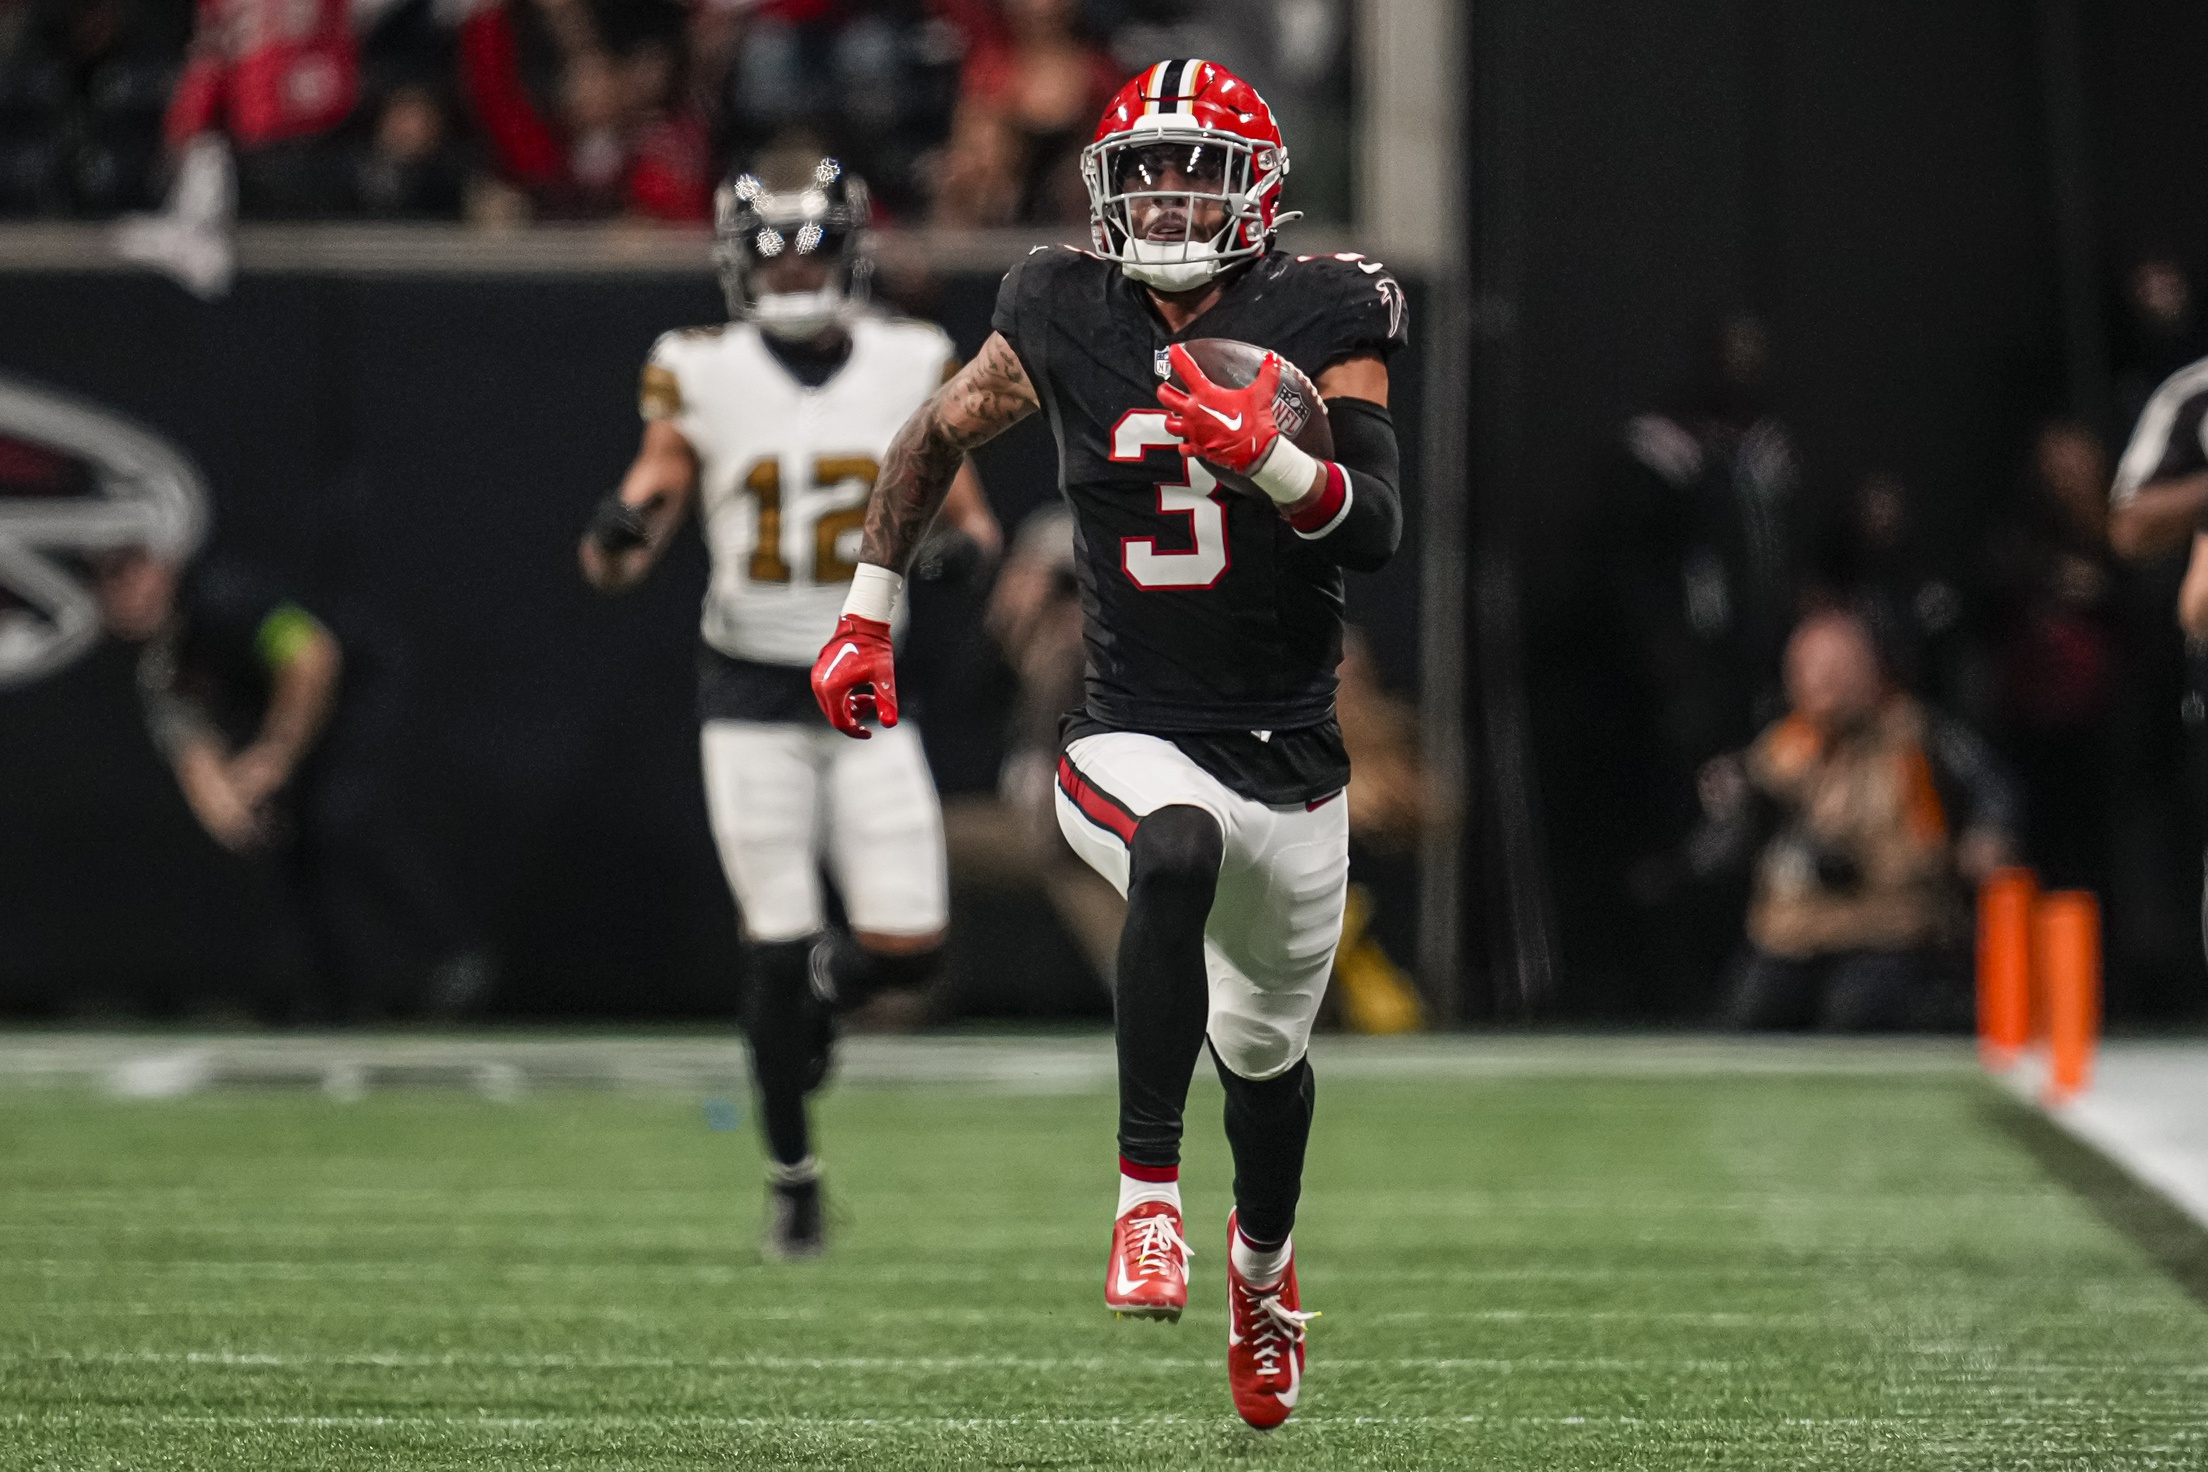 Atlanta Falcons safety Jessie Bates III (3) runs for a touchdown after intercepting a pass against the New Orleans Saints. Mandatory Credit: Dale Zanine-USA TODAY